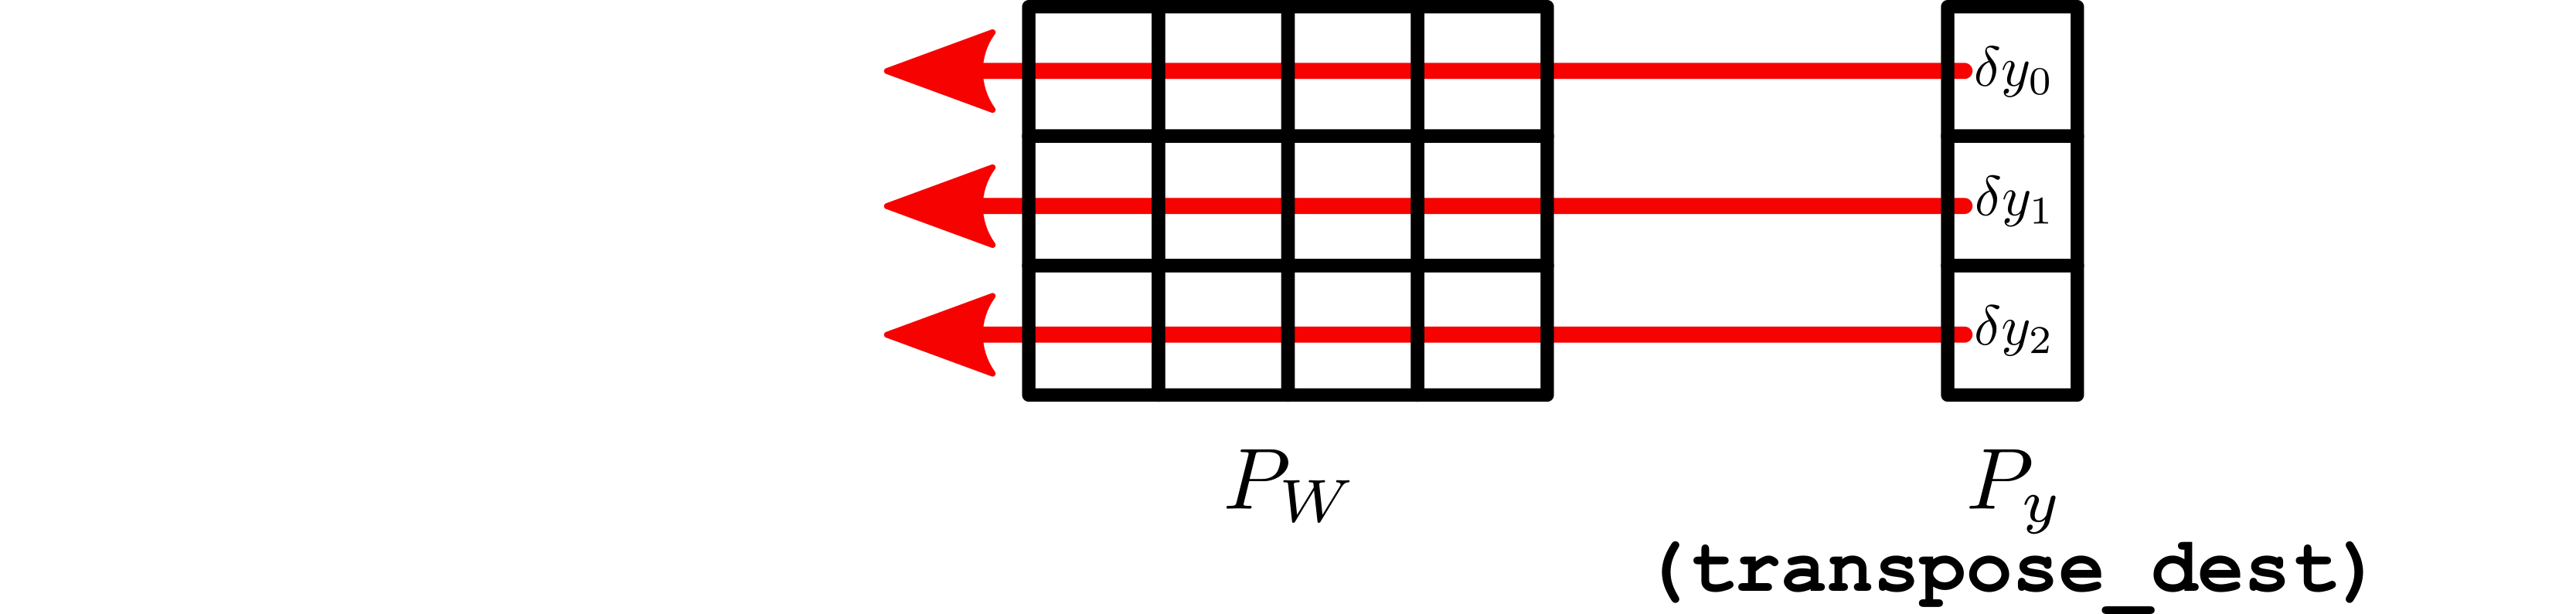 Example adjoint sum-reduction in the distributed linear layer.